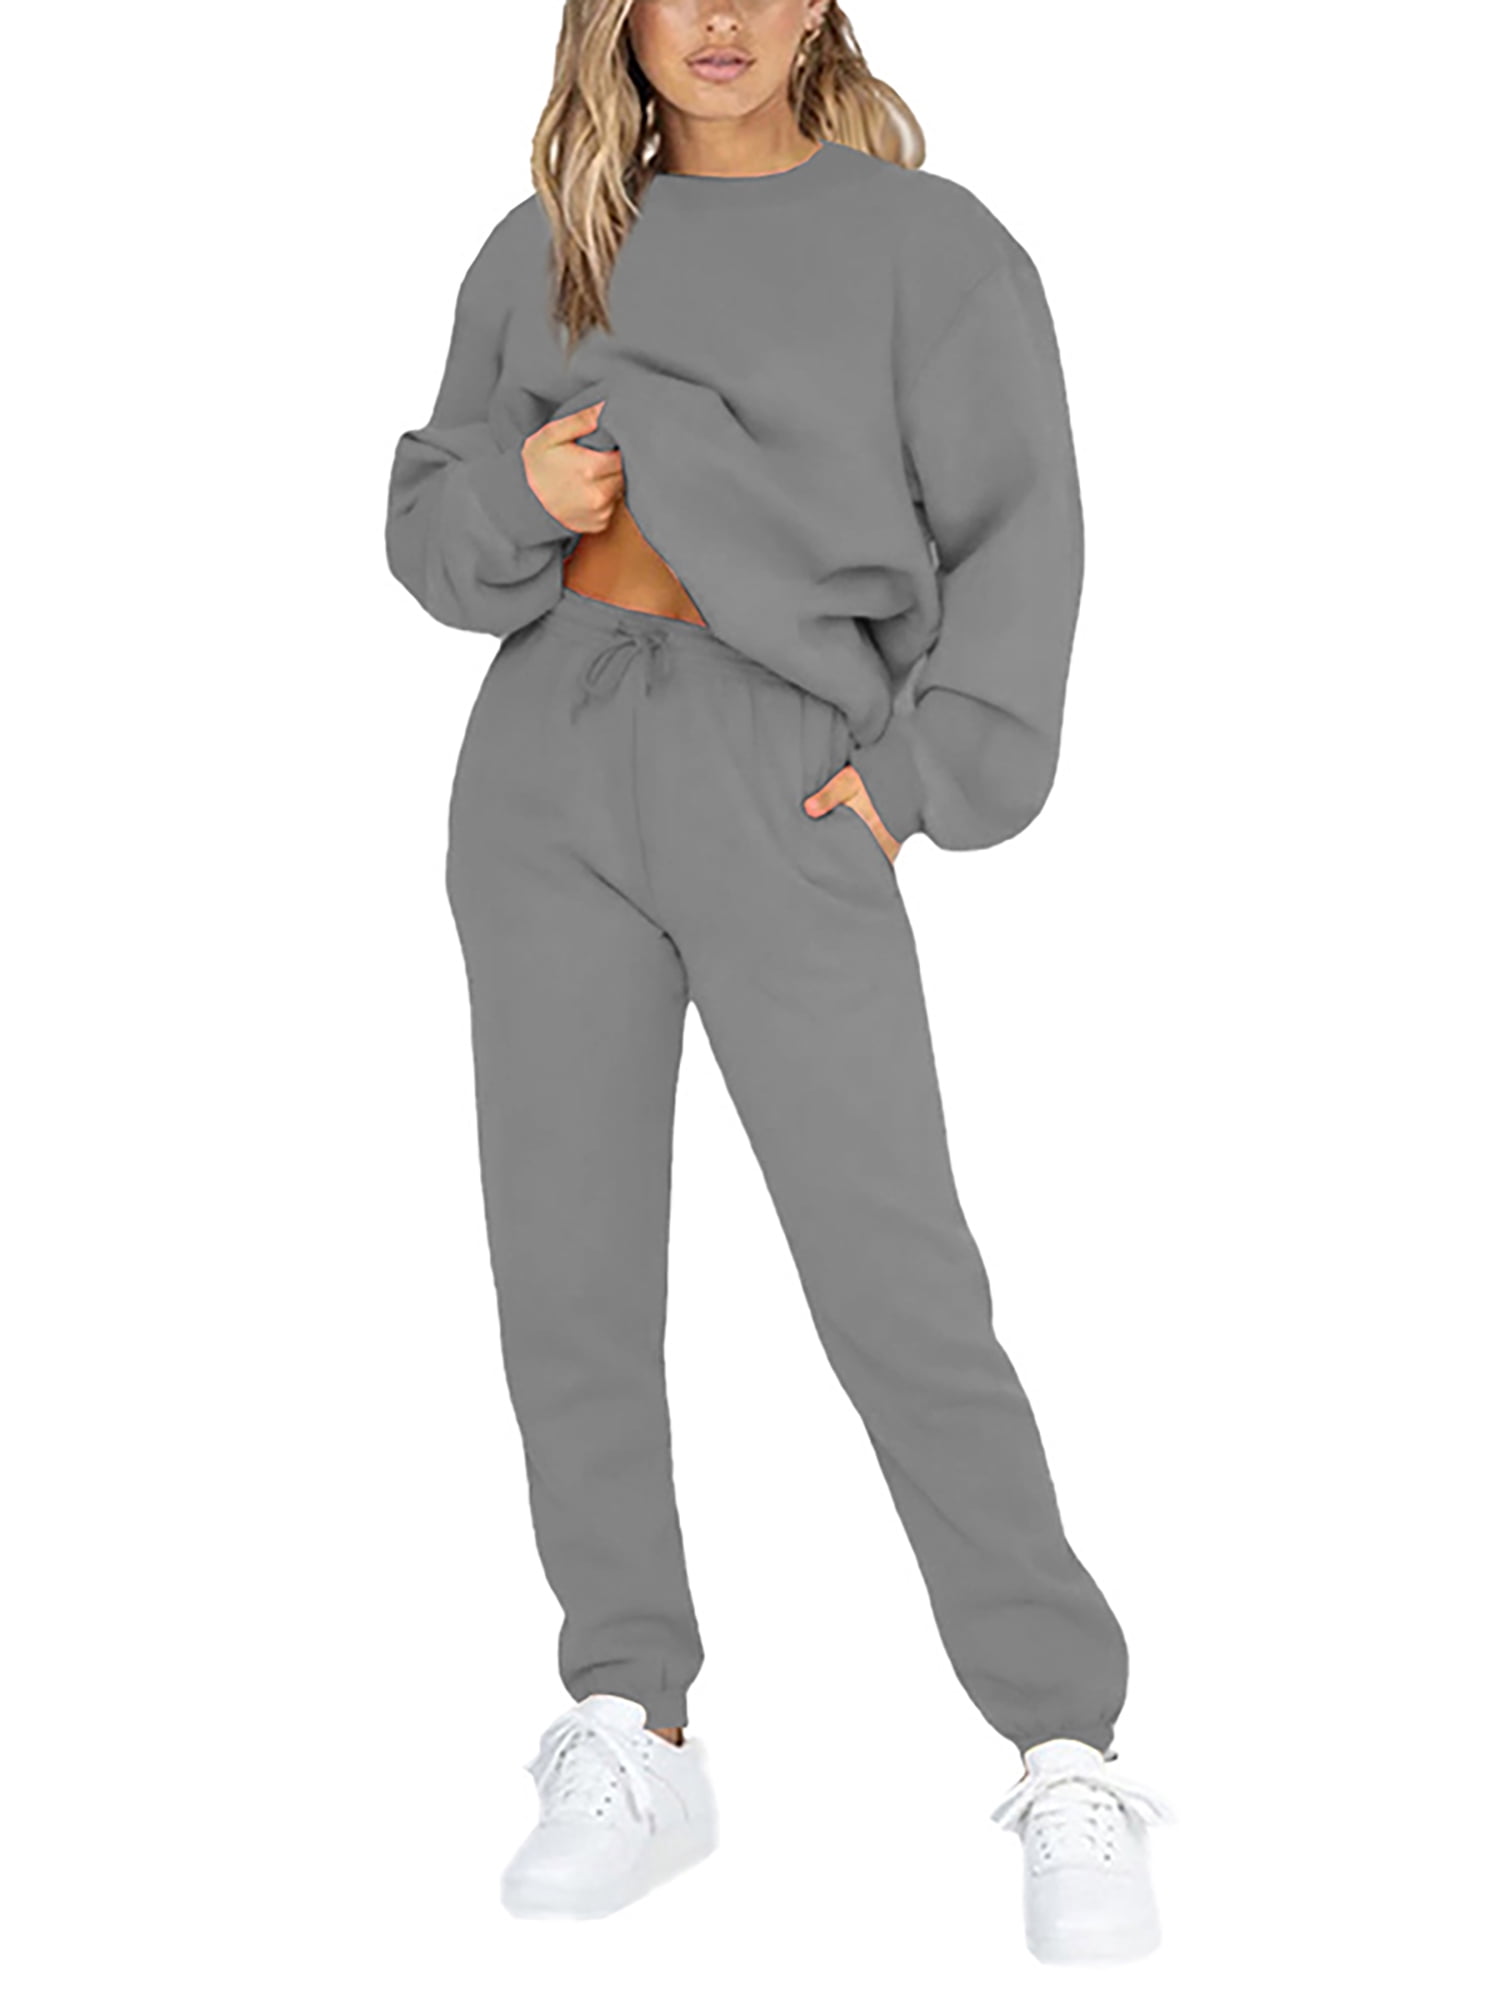 Cindysus Women Tracksuits Long Sleeve Solid Color Sweat Suits Sleep Lounge  Jogging Outfits For Womens Winter Outdoor Activewear Grey 5XL 